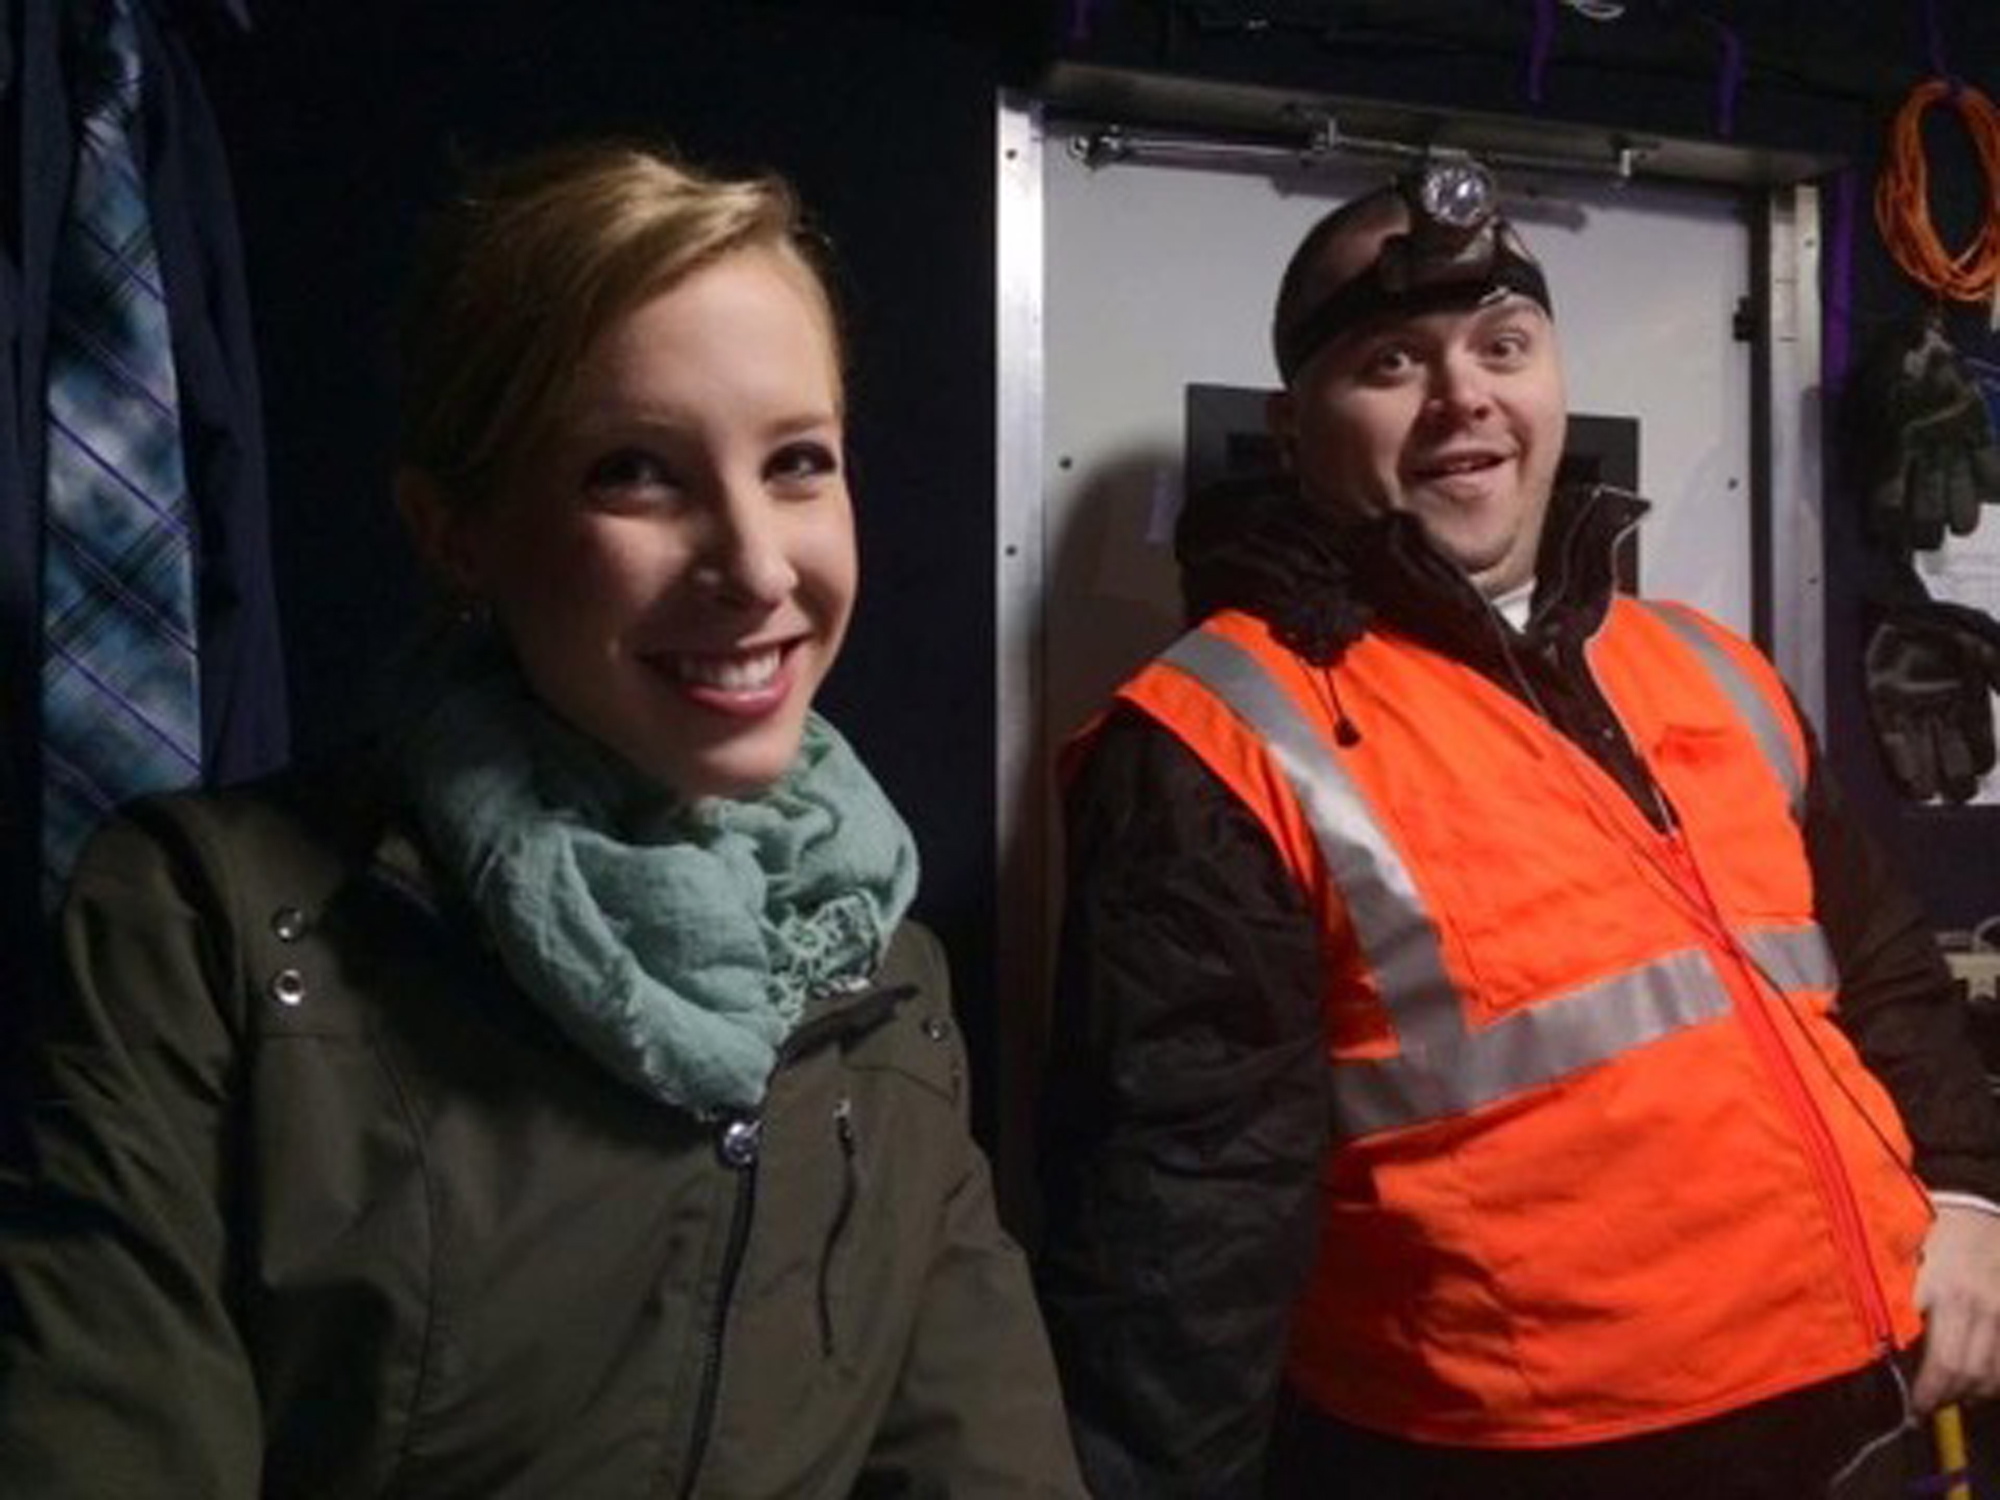 FILE - This undated file image made available by WDBJ-TV shows reporter Alison Parker, left, and cameraman Adam Ward. Community religious leaders gathered Sunday, Aug. 30, 2015 to remember Parker and Ward, who were shot and killed by a former co-worker on Aug. 26.